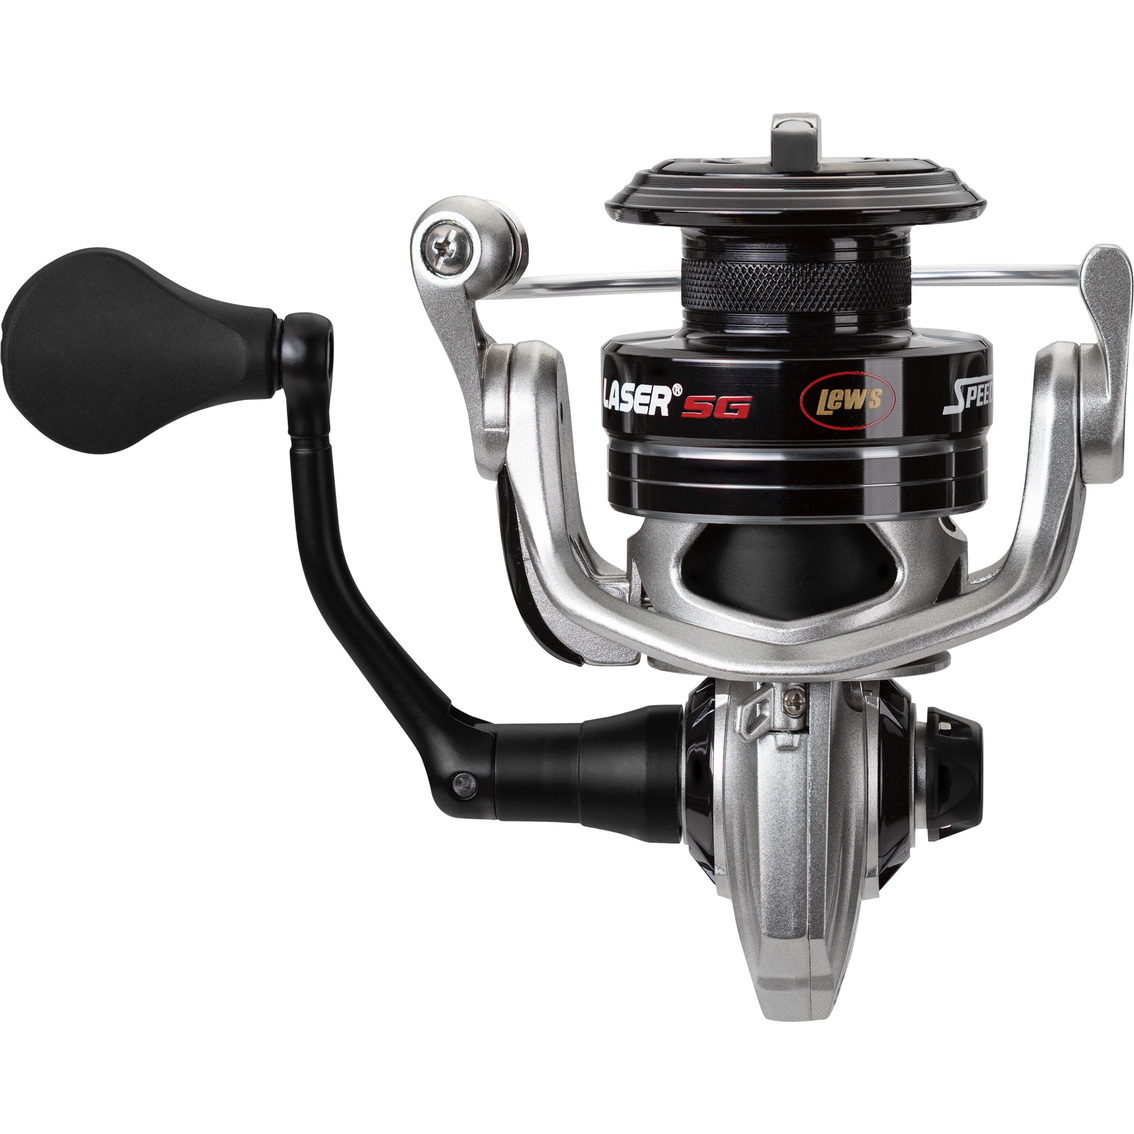 Lew's Laser SG Speed Spin 300 Spinning Reel Clam Pack - Image 6 of 6